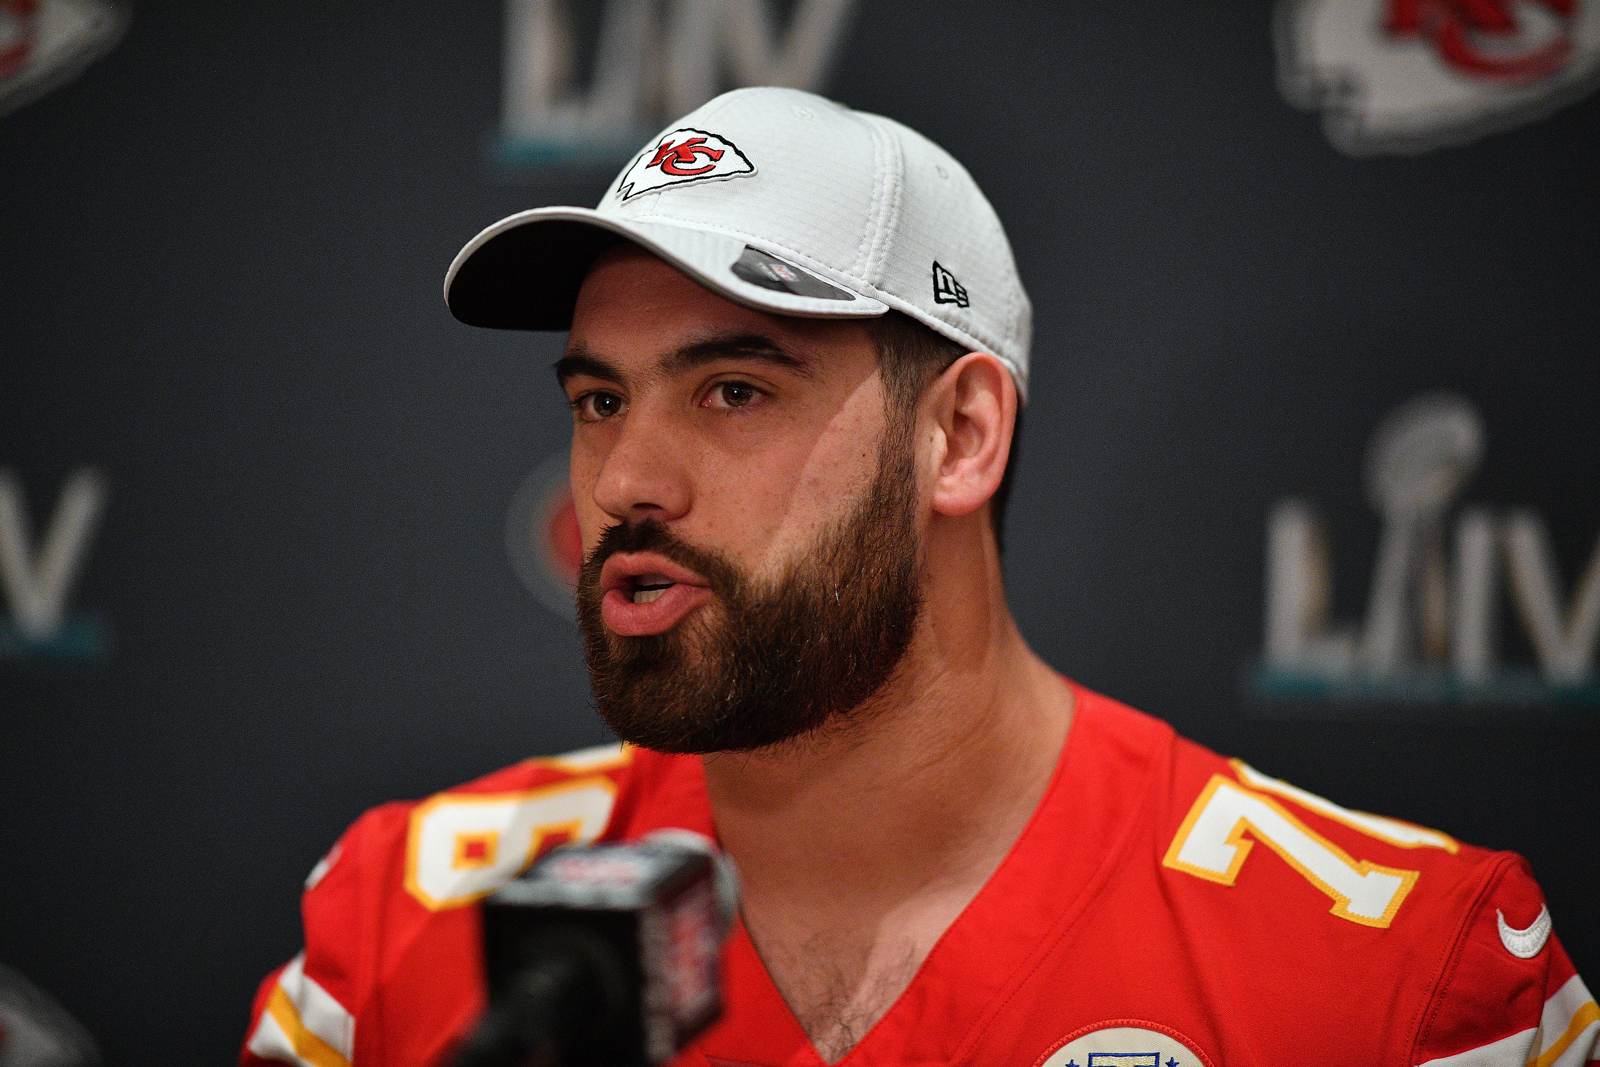 Laurent Duvernay-Tardif #76 of the Kansas City Chiefs speaks to the media during the Kansas City Chiefs media availability prior to Super Bowl LIV at the JW Marriott Turnberry on January 29 in Aventura, Florida.